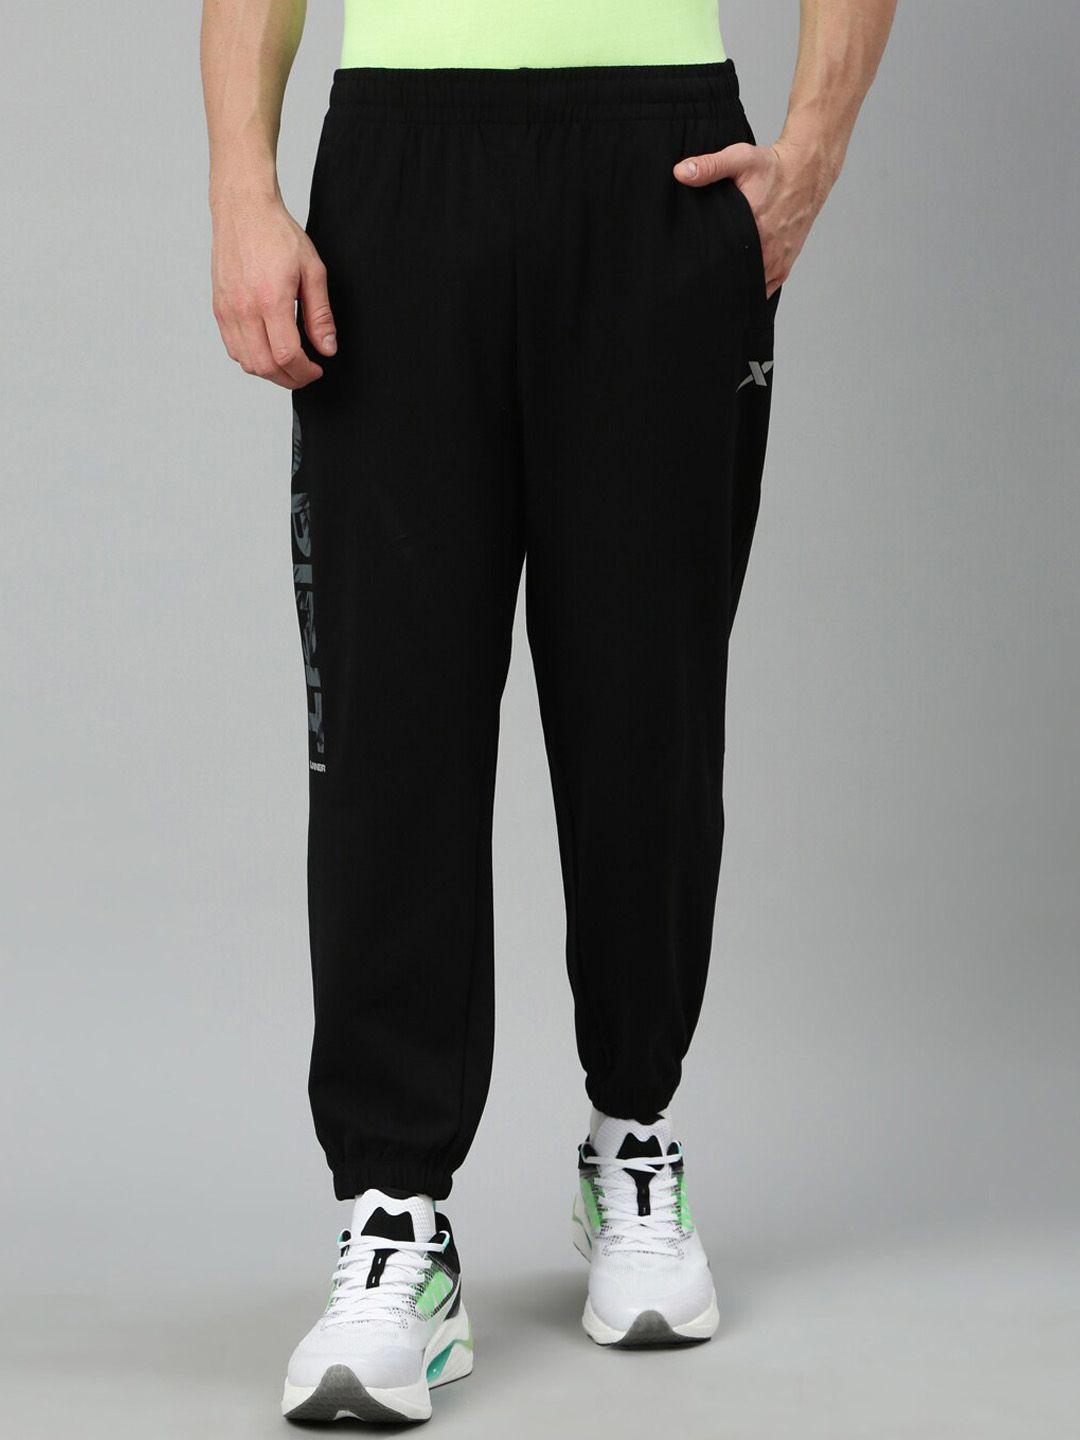 xtep men brand logo antimicrobial athletic elasticityprimary joggers